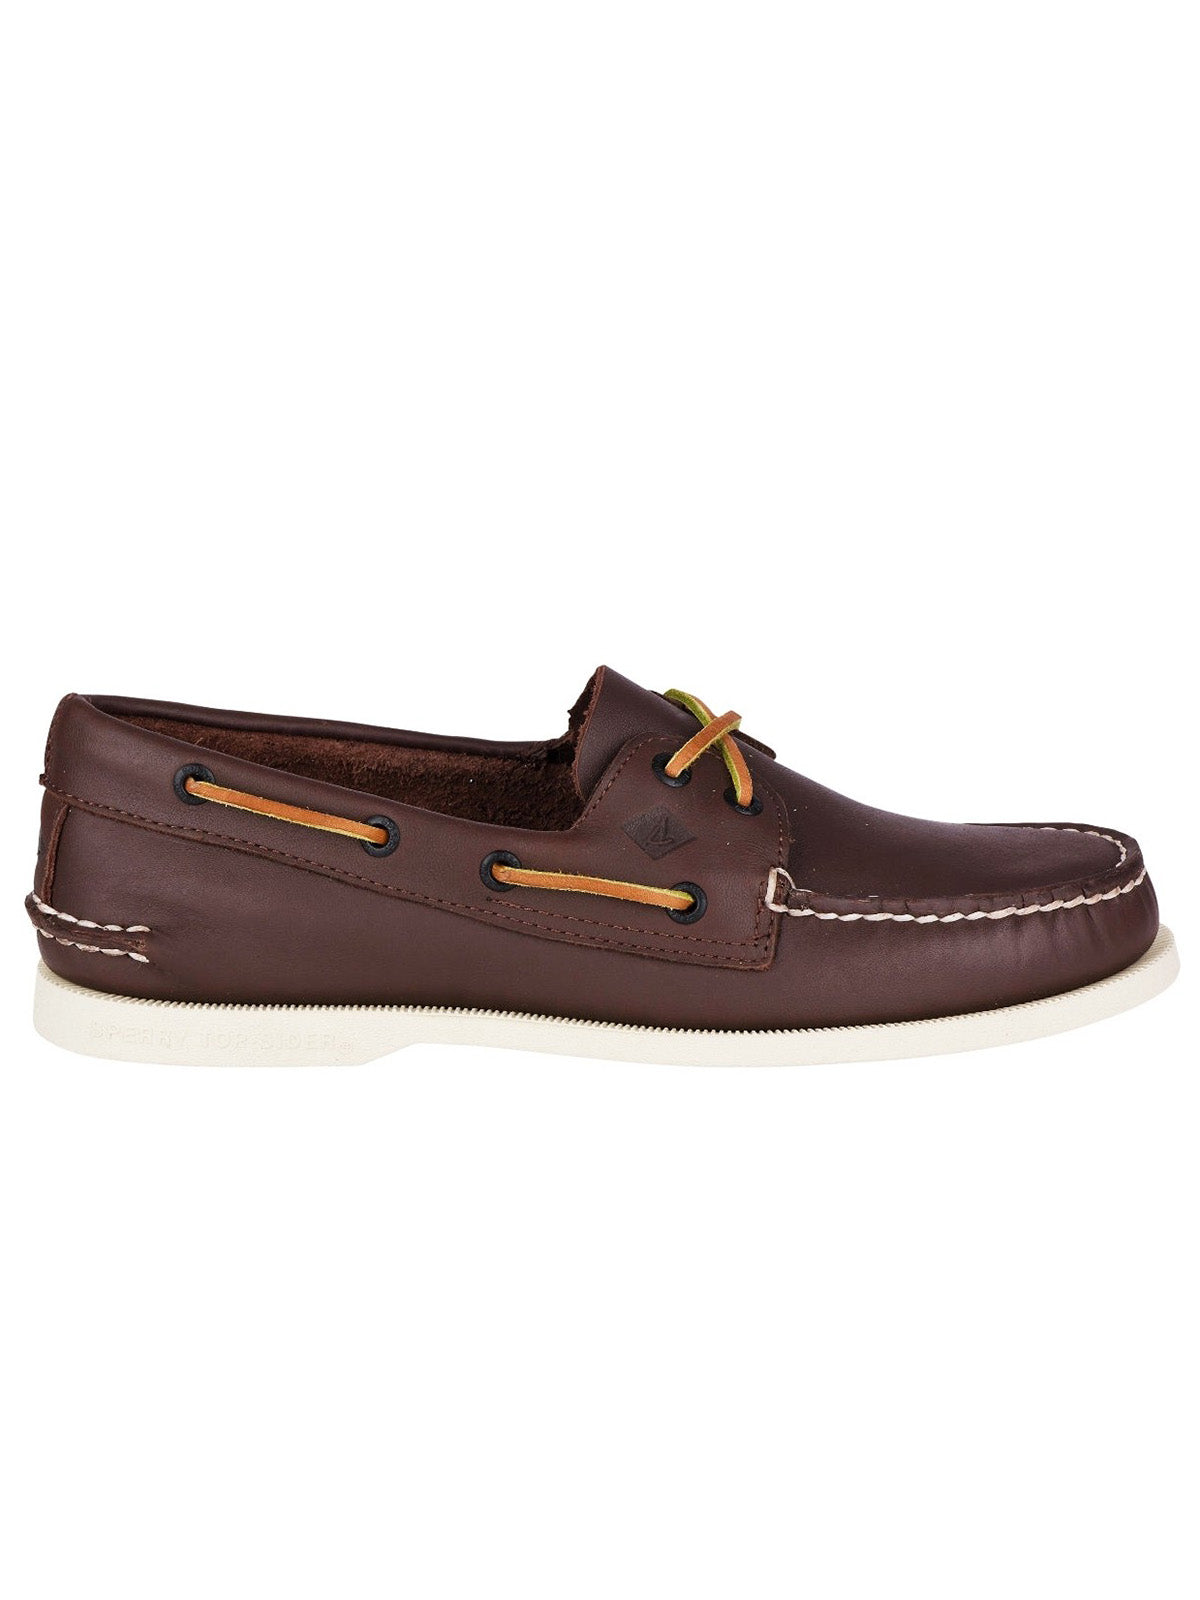 Sperry Mens Boat Shoes - Sperry Topsider Authentic Original 2-Eye Classic - Brown